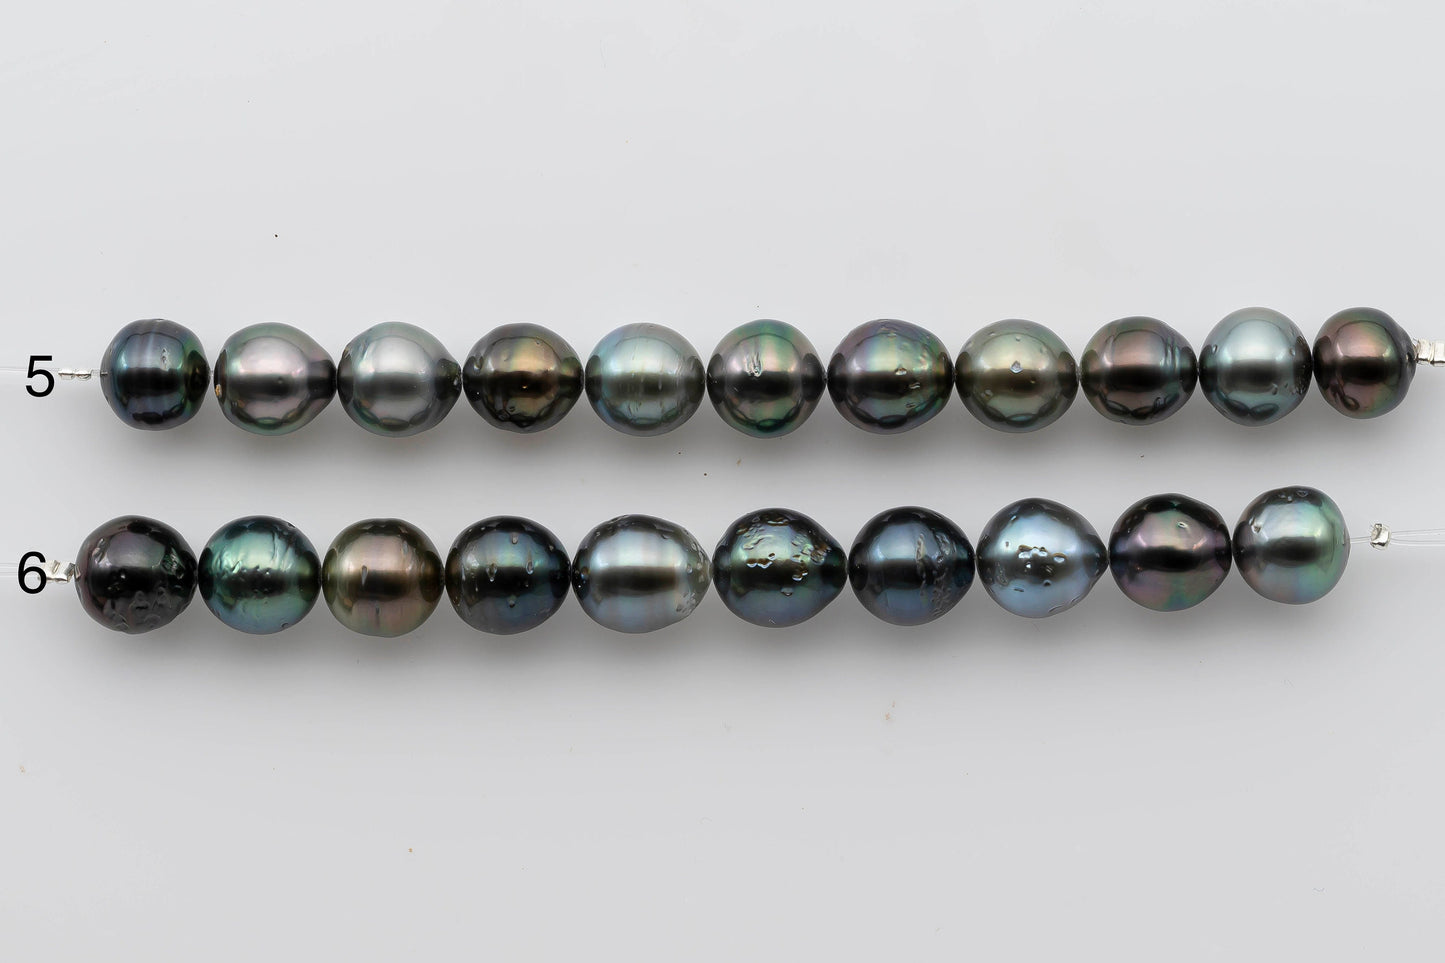 9-10mm Tahitian Pearl Near Round in Natural Color with High Luster in Shorter Stands for Beading or Jewelry Making, SKU # 1312TH